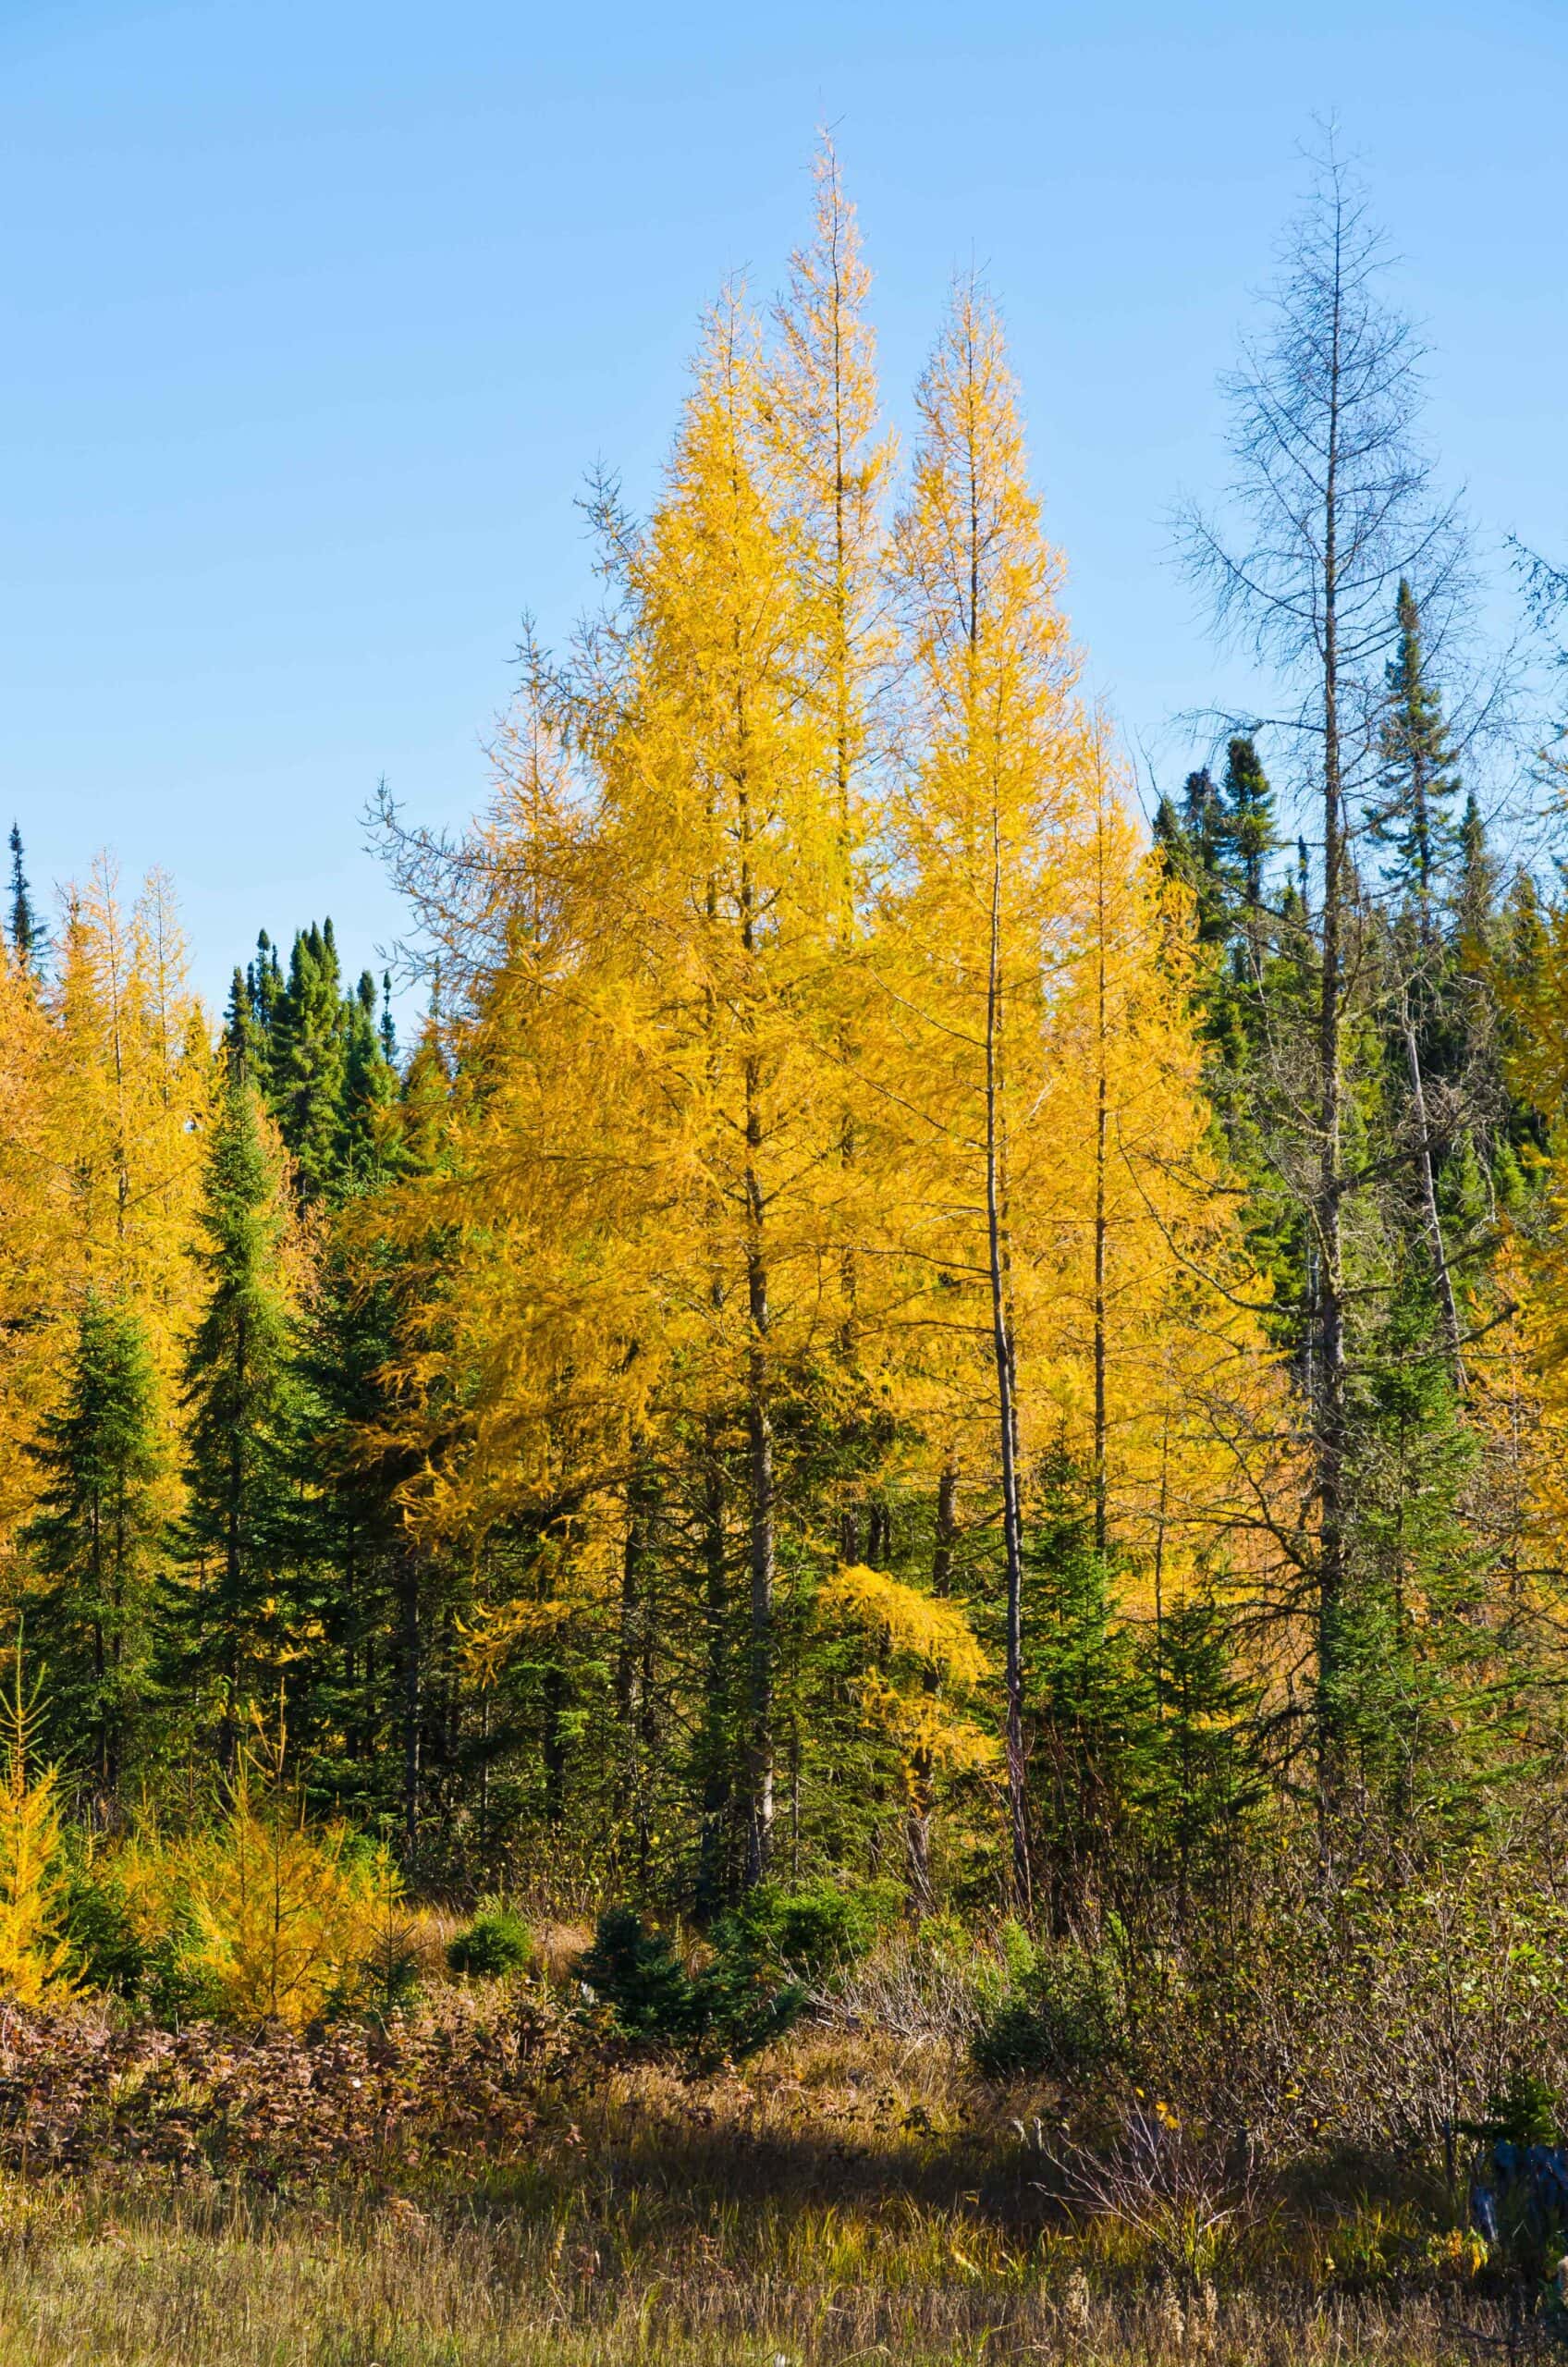 Trees turning yellow in autumn in Northern Ontario